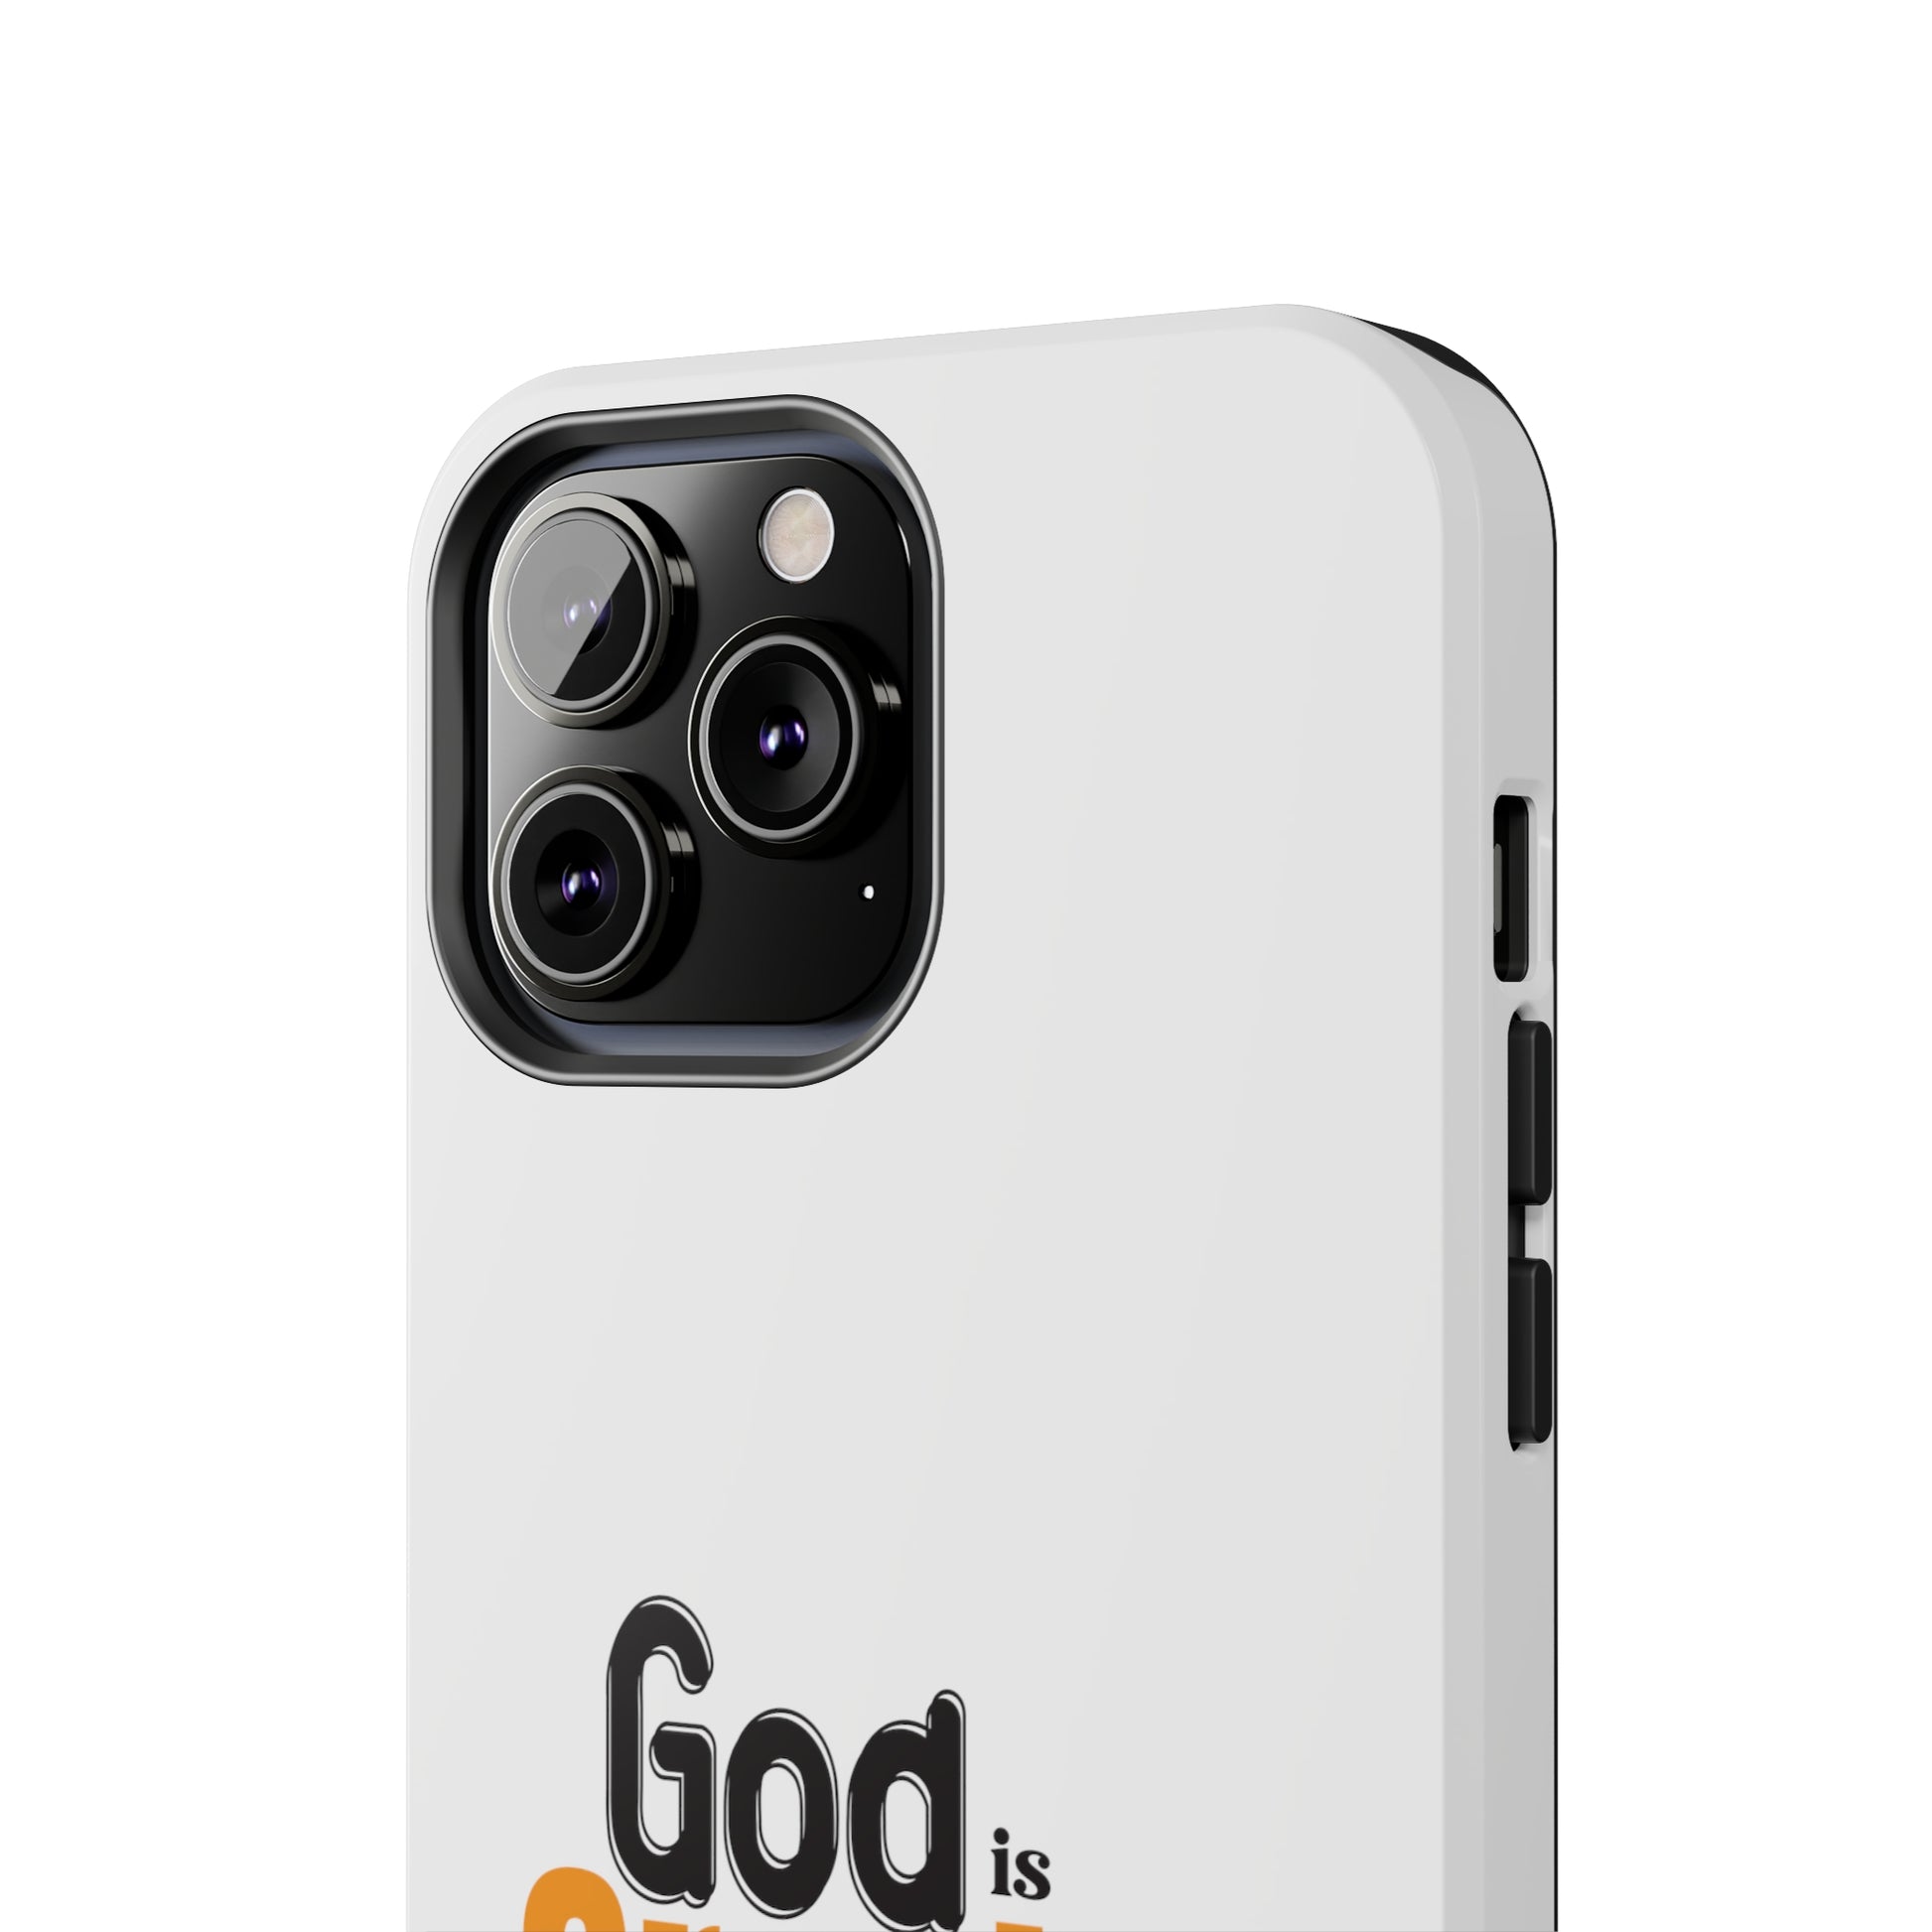 God Is Greater Christian Phone Tough Phone Cases, Case-Mate Printify